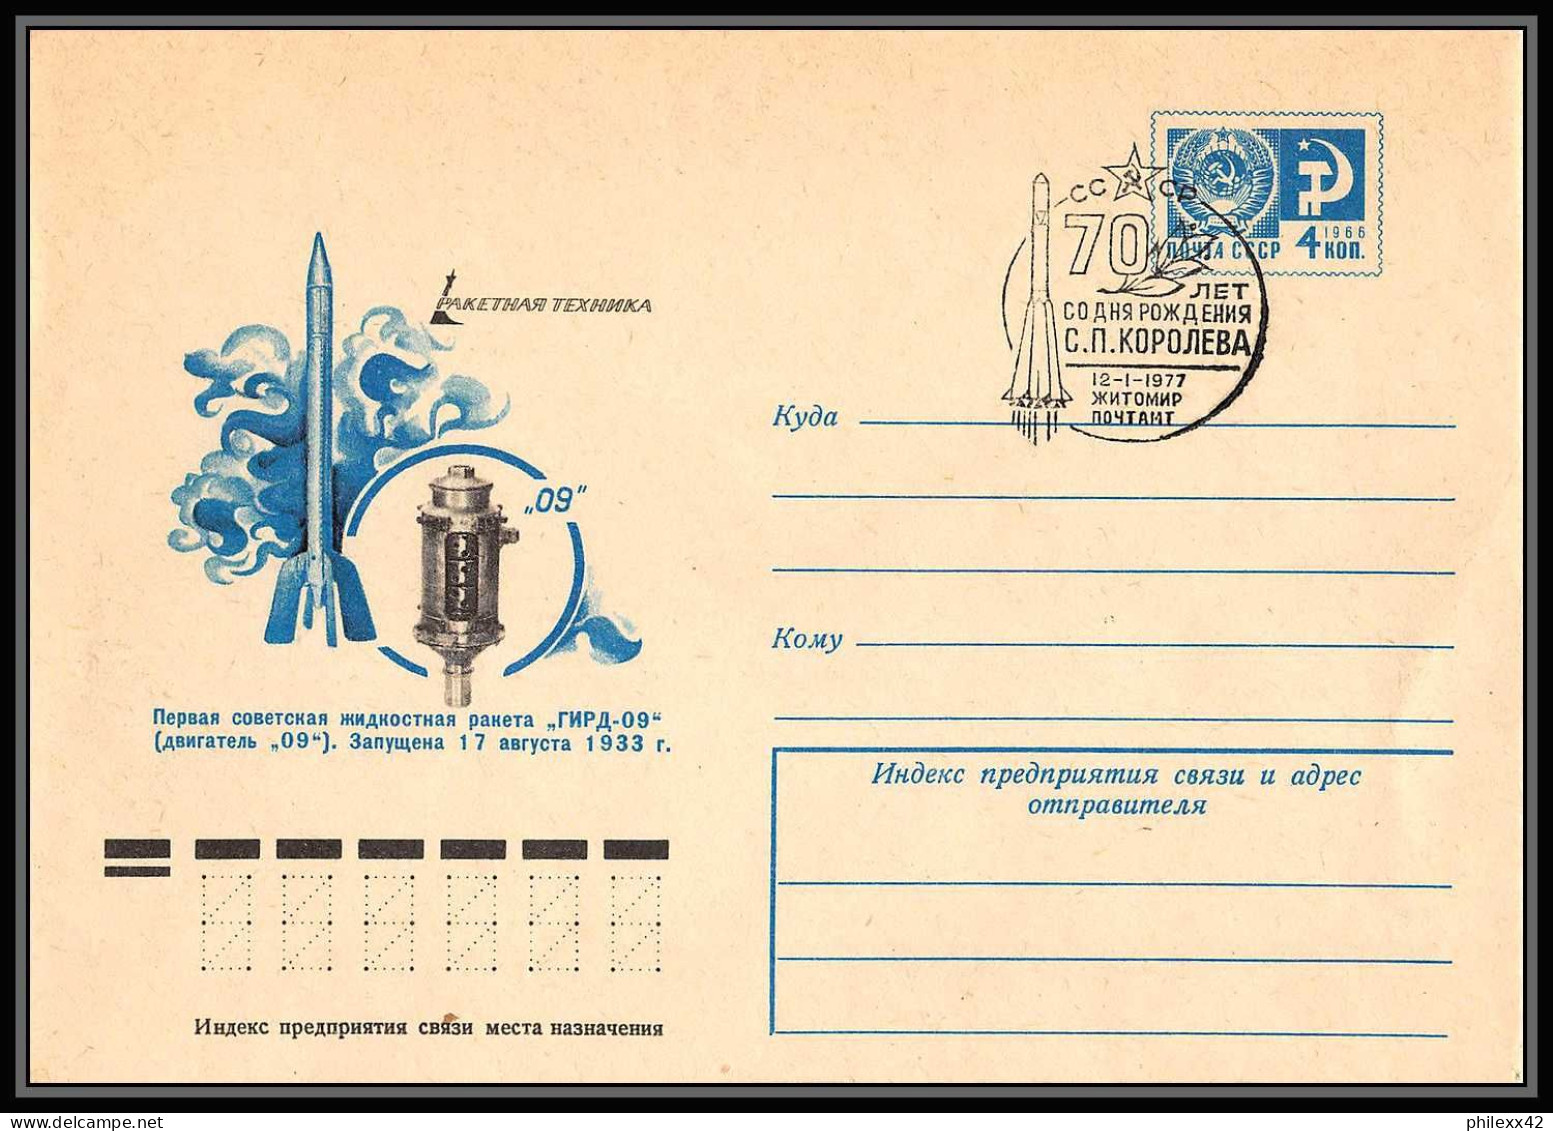 1037 Espace (space Raumfahrt) Entier Postal (Stamped Stationery) Russie (Russia Urss USSR) 12/1/1977 Korolev 4 Lettres - Russie & URSS